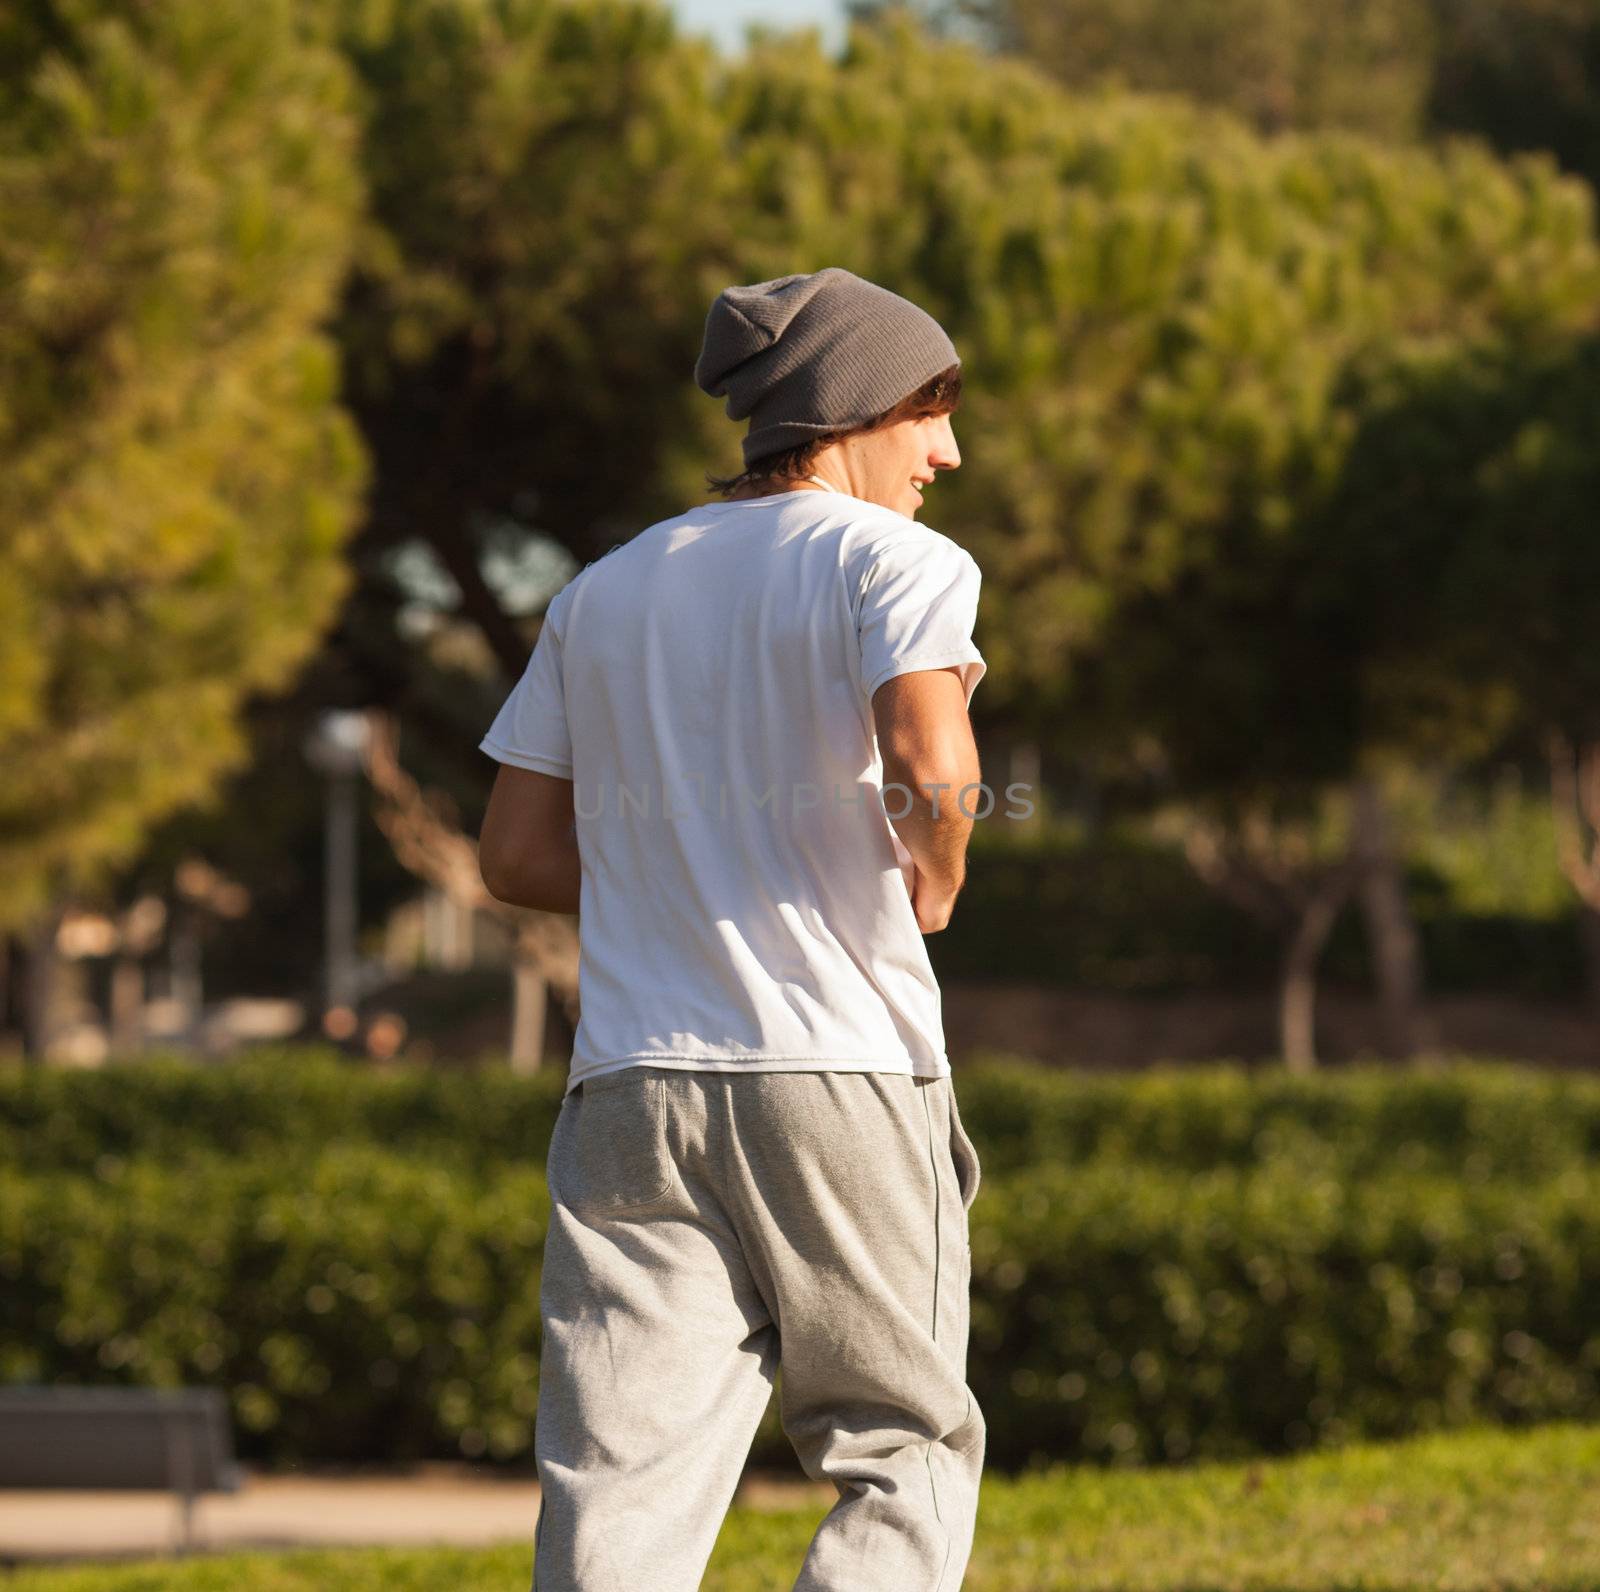 young handsome man jogging in public park by Lcrespi